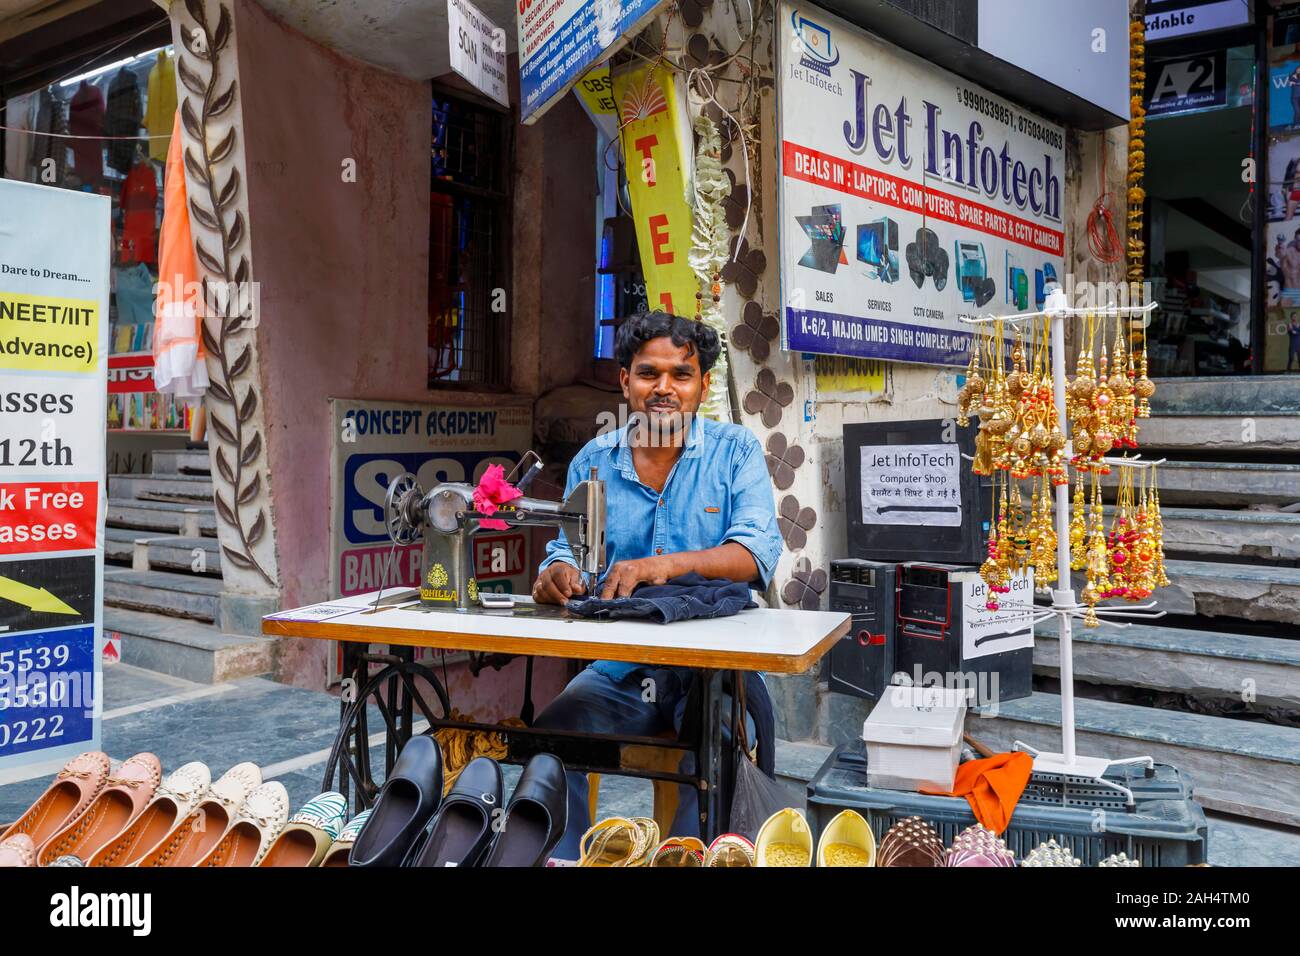 Street scene in Mahipalpur district, a suburb near Delhi Airport in New Delhi, capital city of India: local man working with a manual sewing machine Stock Photo